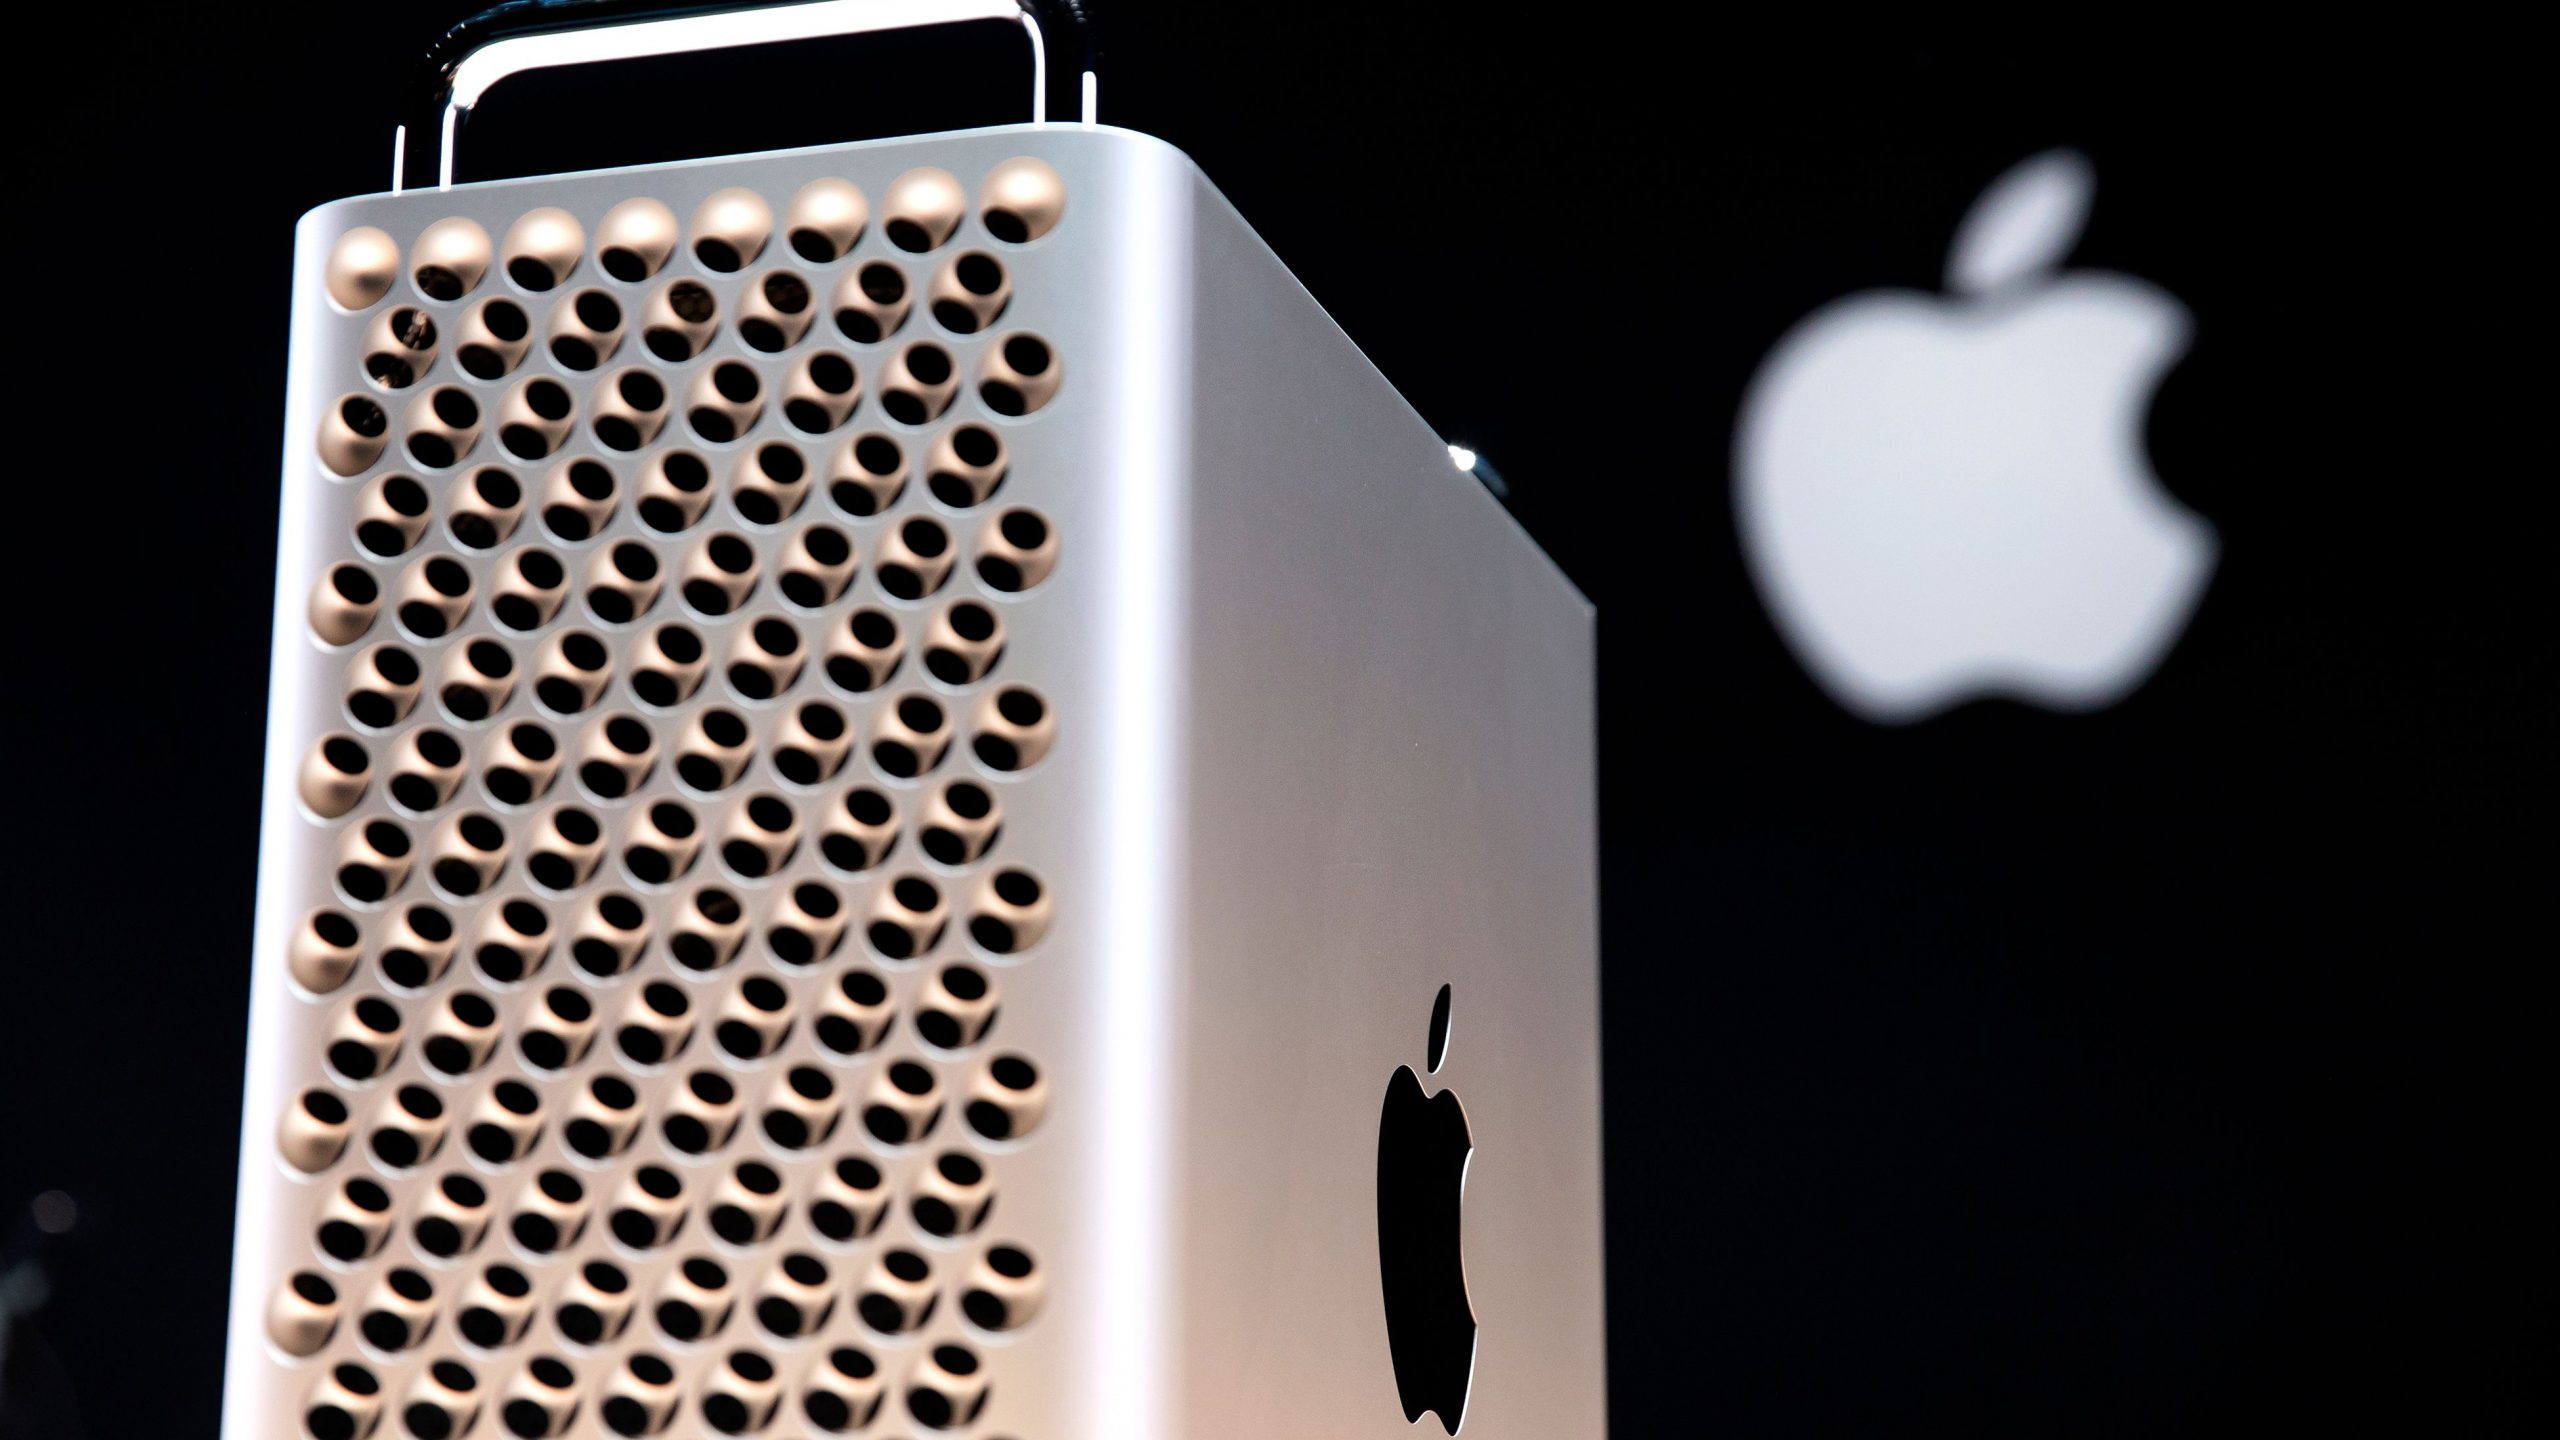 Mac Pro 2022 Could Be A 40 Core Monster Packing Two M1 Ultra Chips